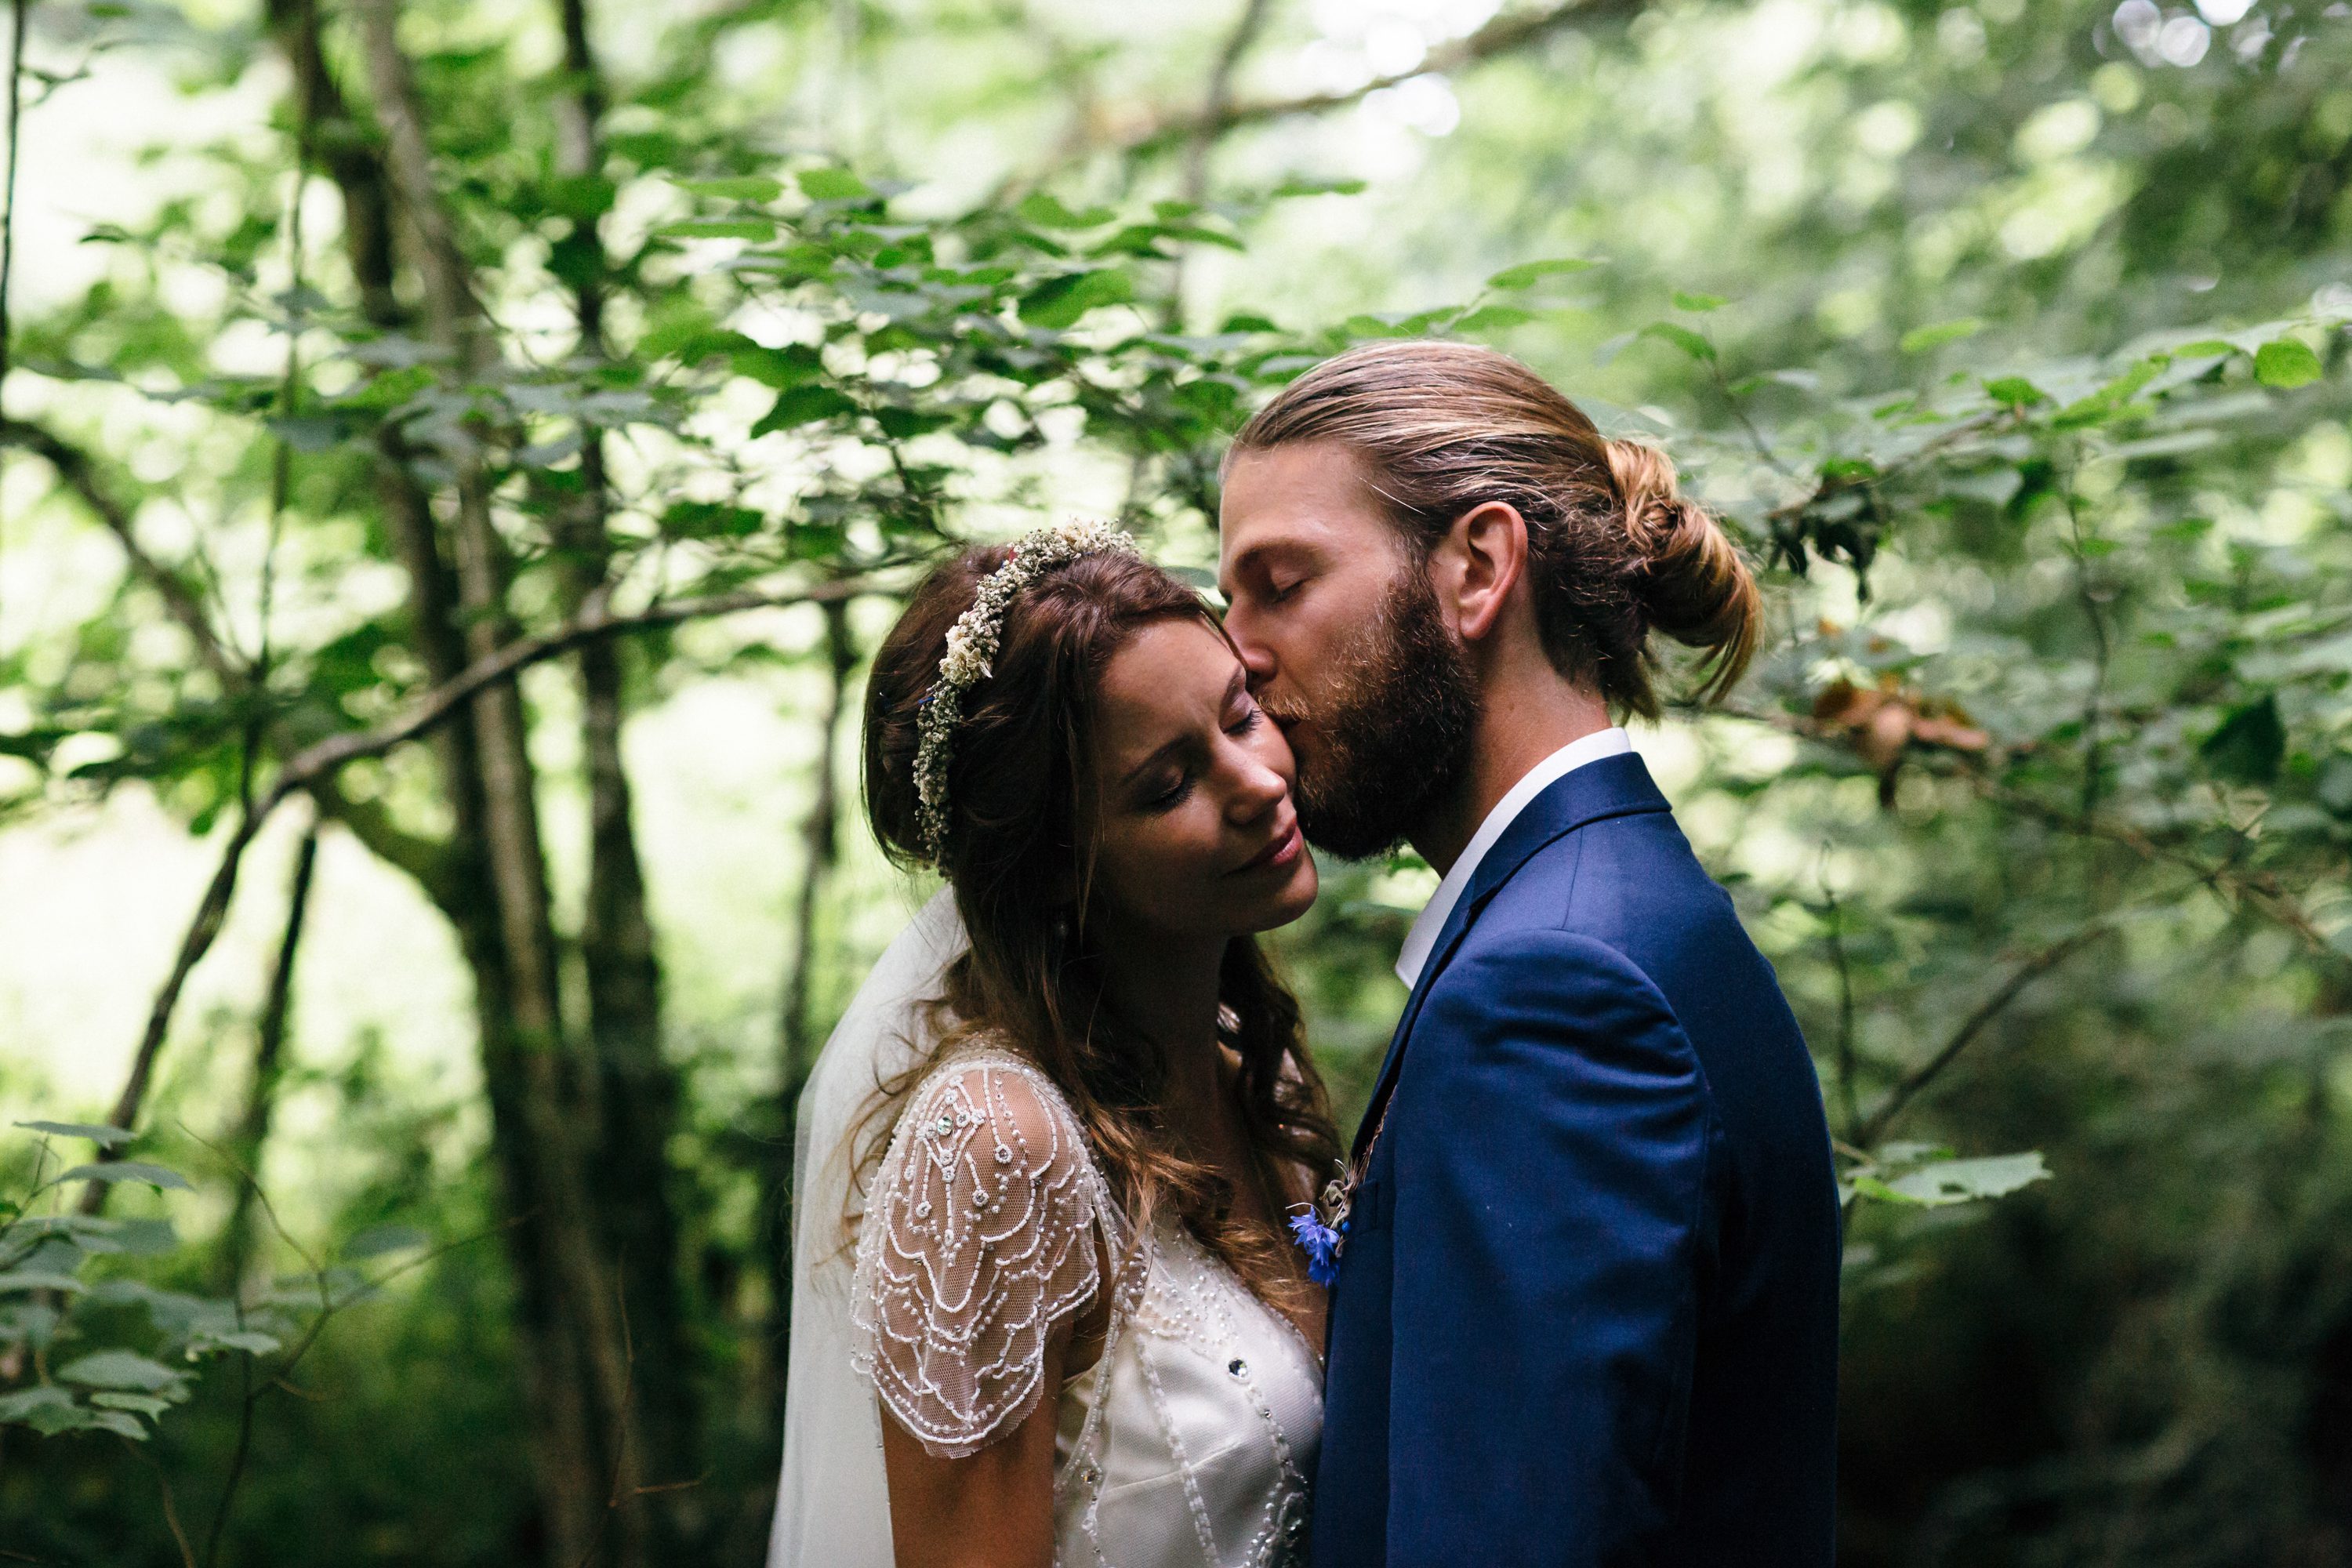 Festival Style wedding in Devon by Freckle Photography